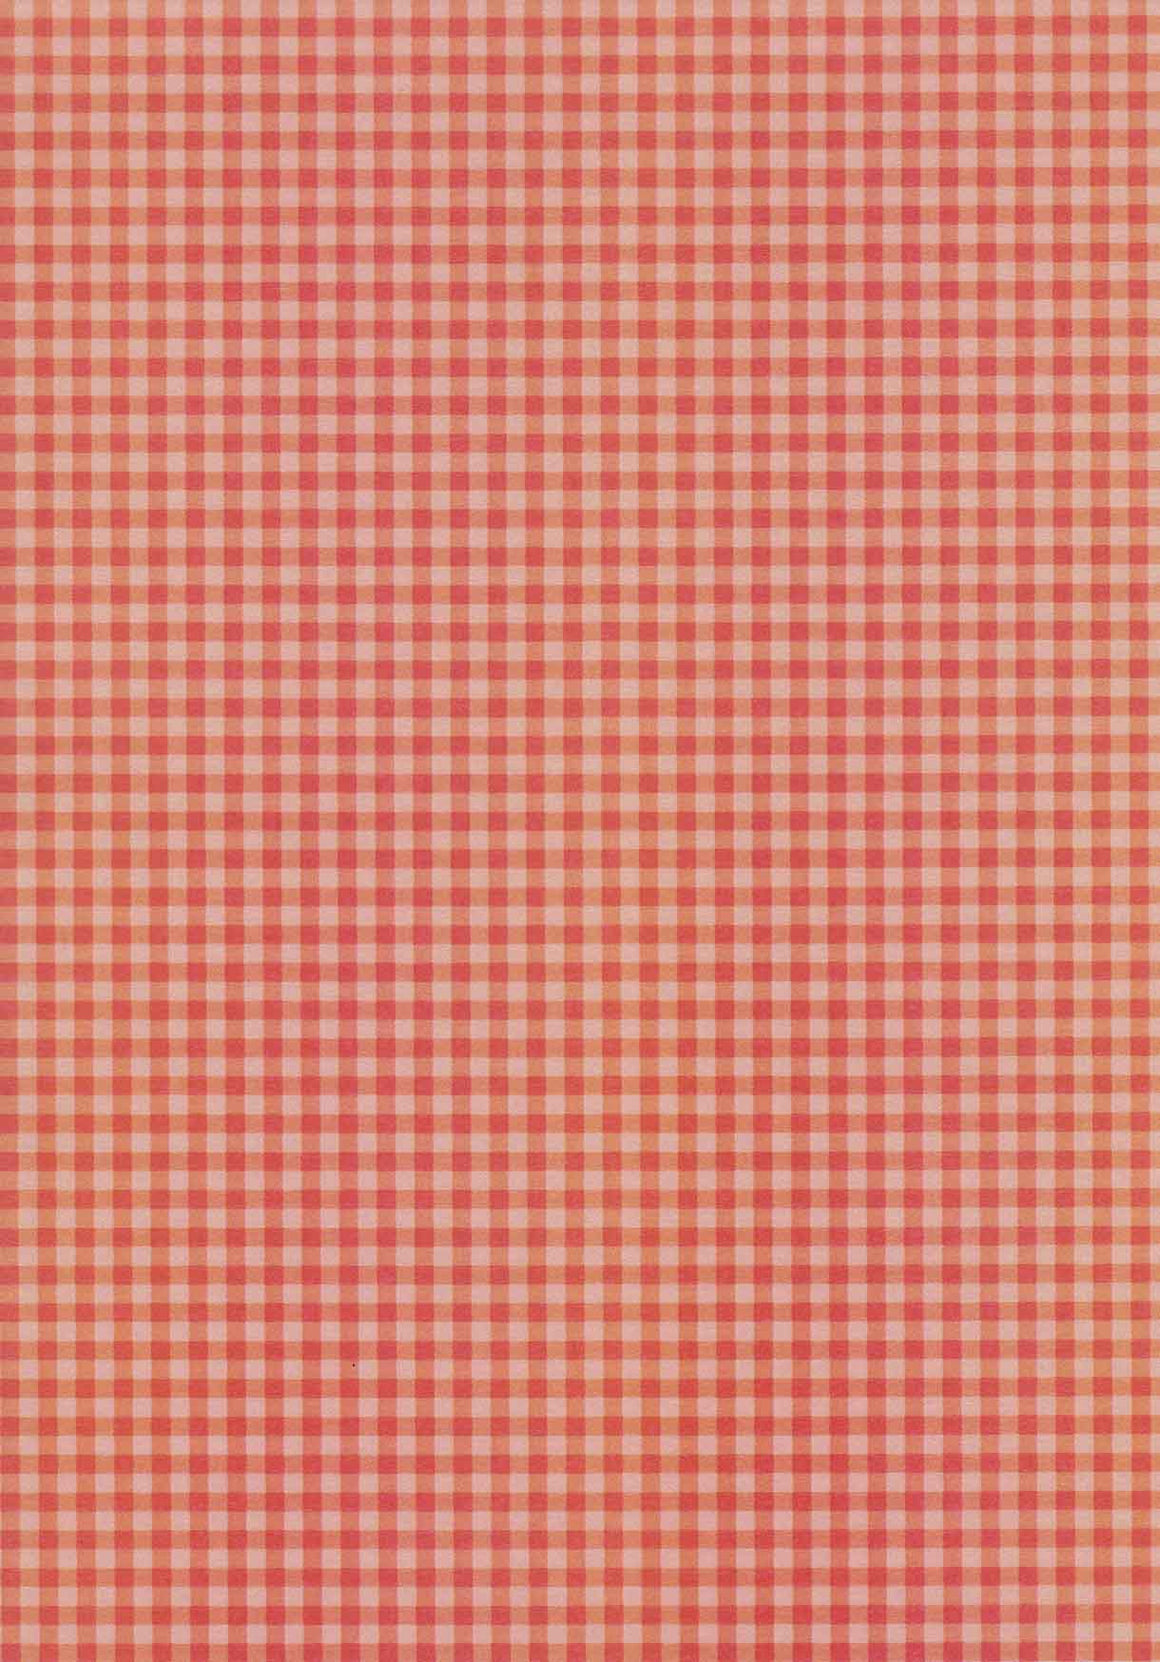 Red Gingham A4 Paper